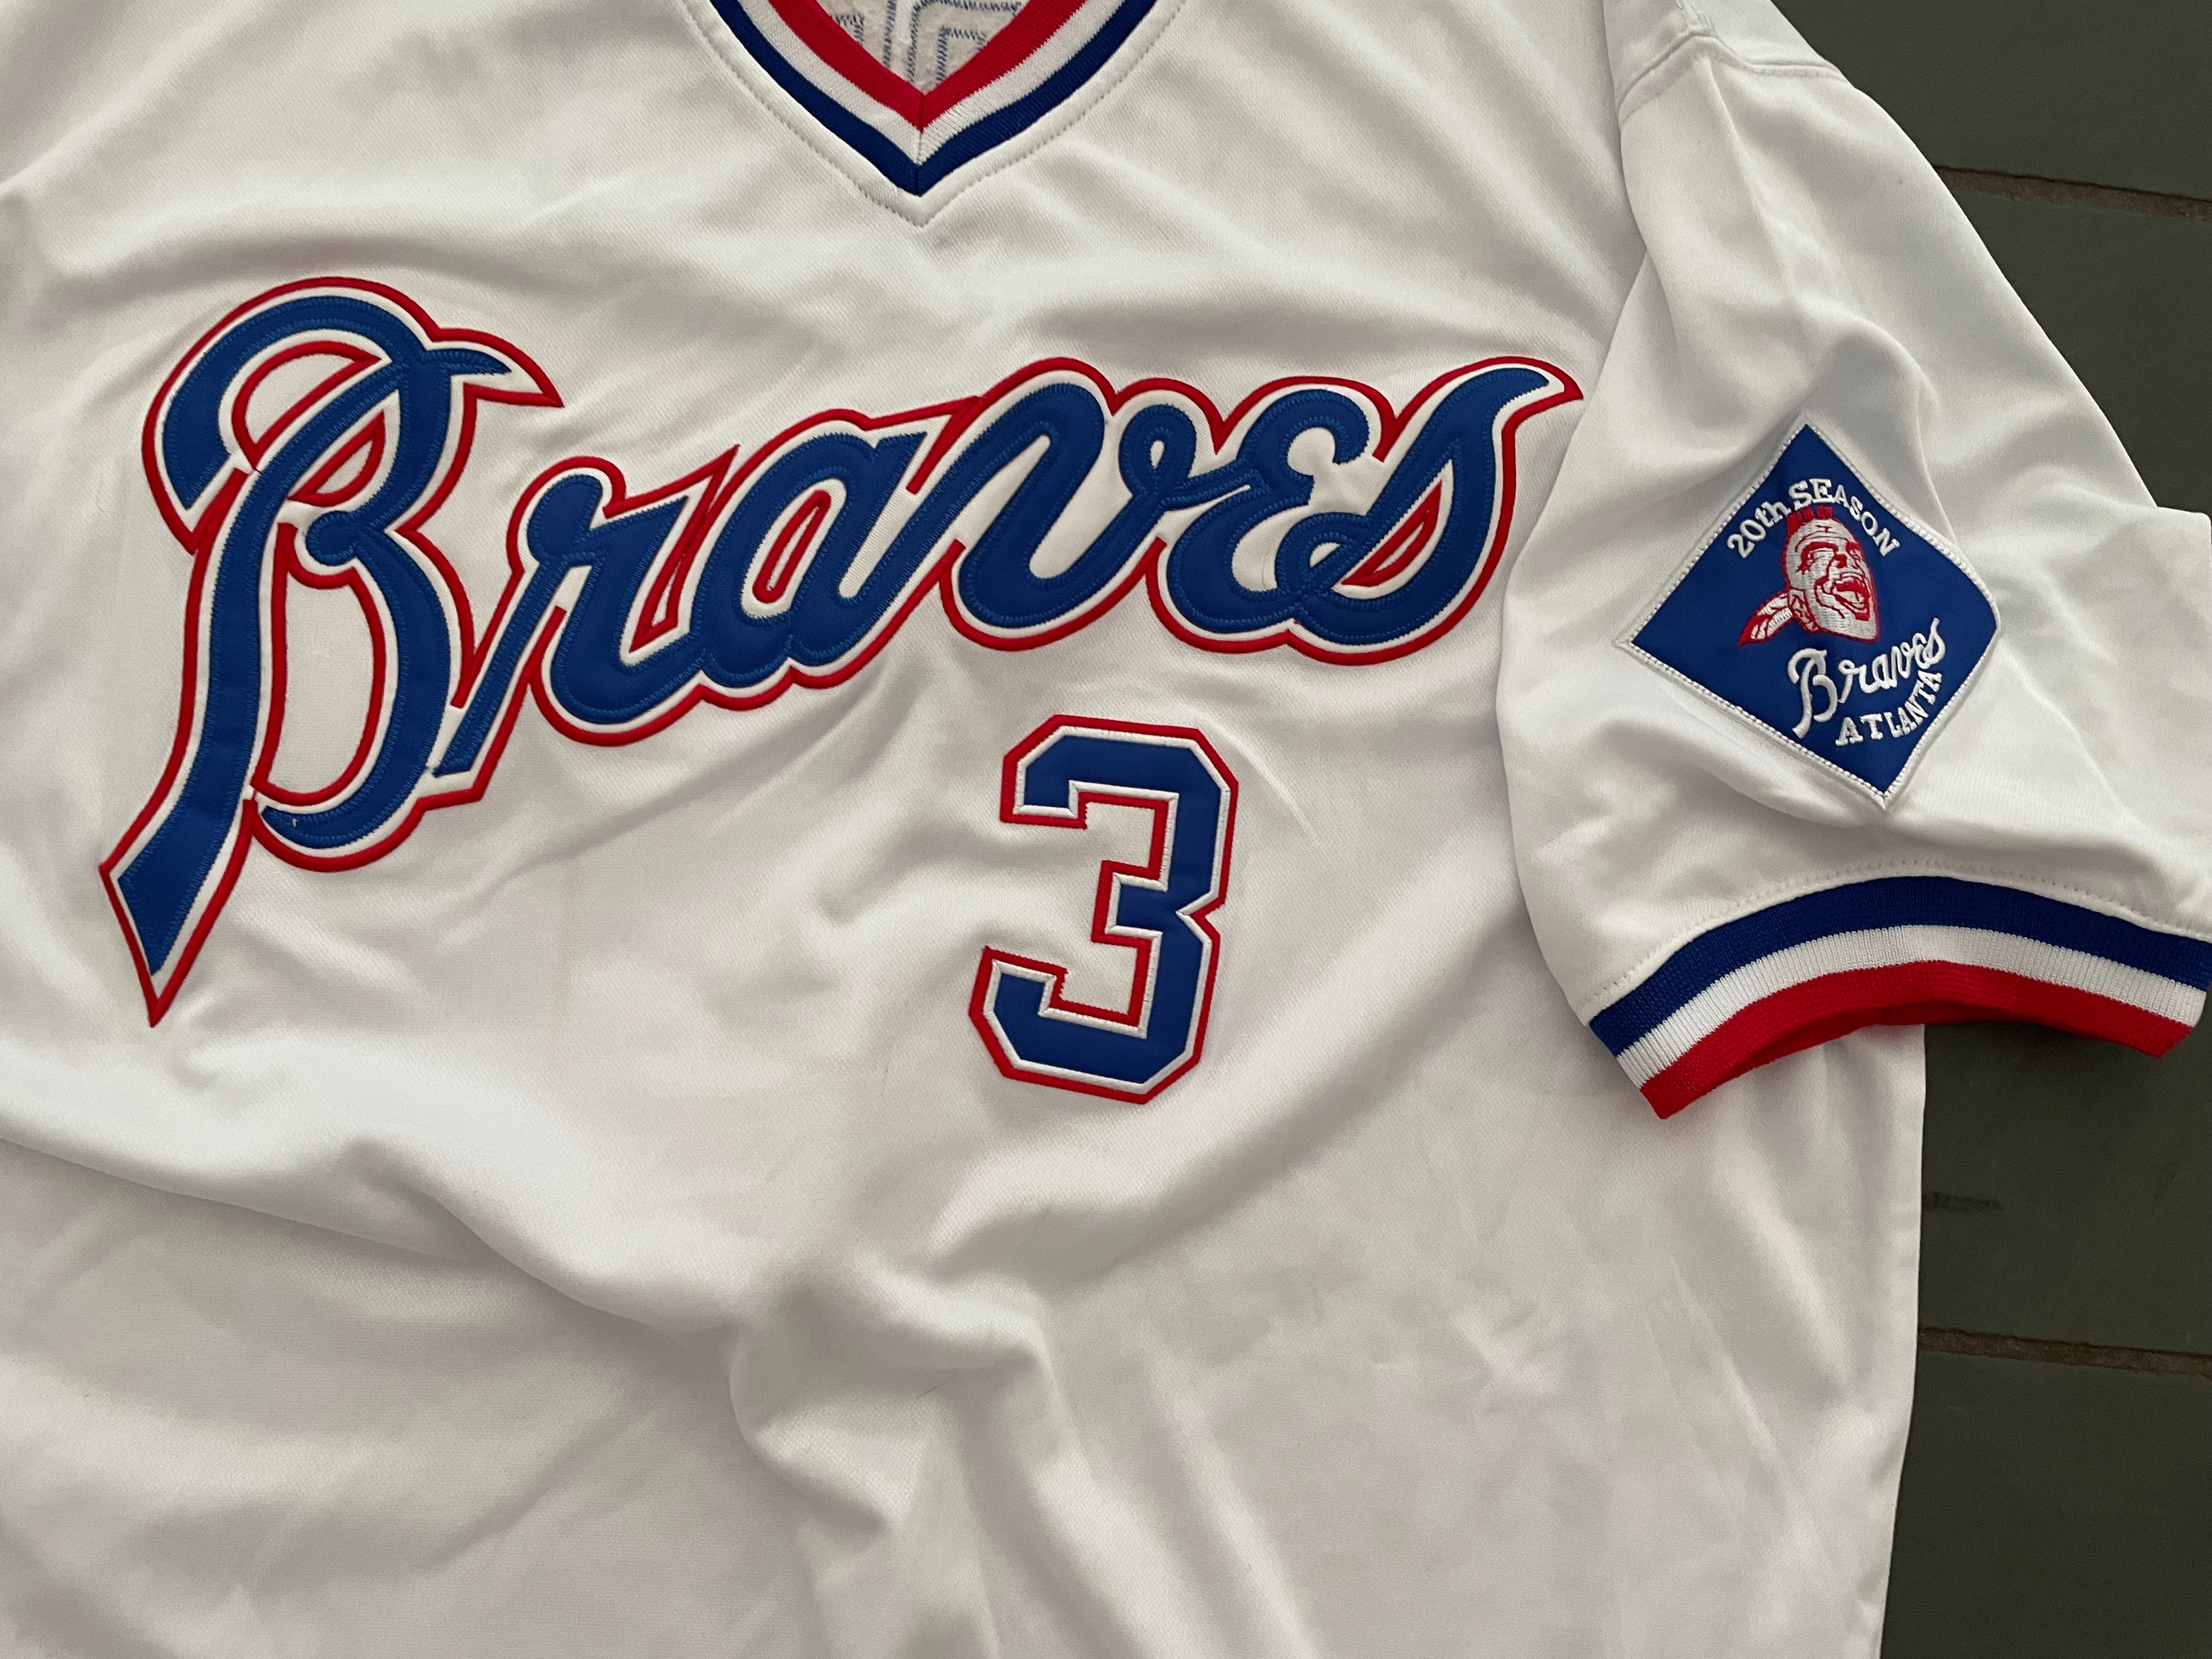 Atlanta Braves #3 Dale Murphy Light Blue Throwback Jersey on sale,for  Cheap,wholesale from China